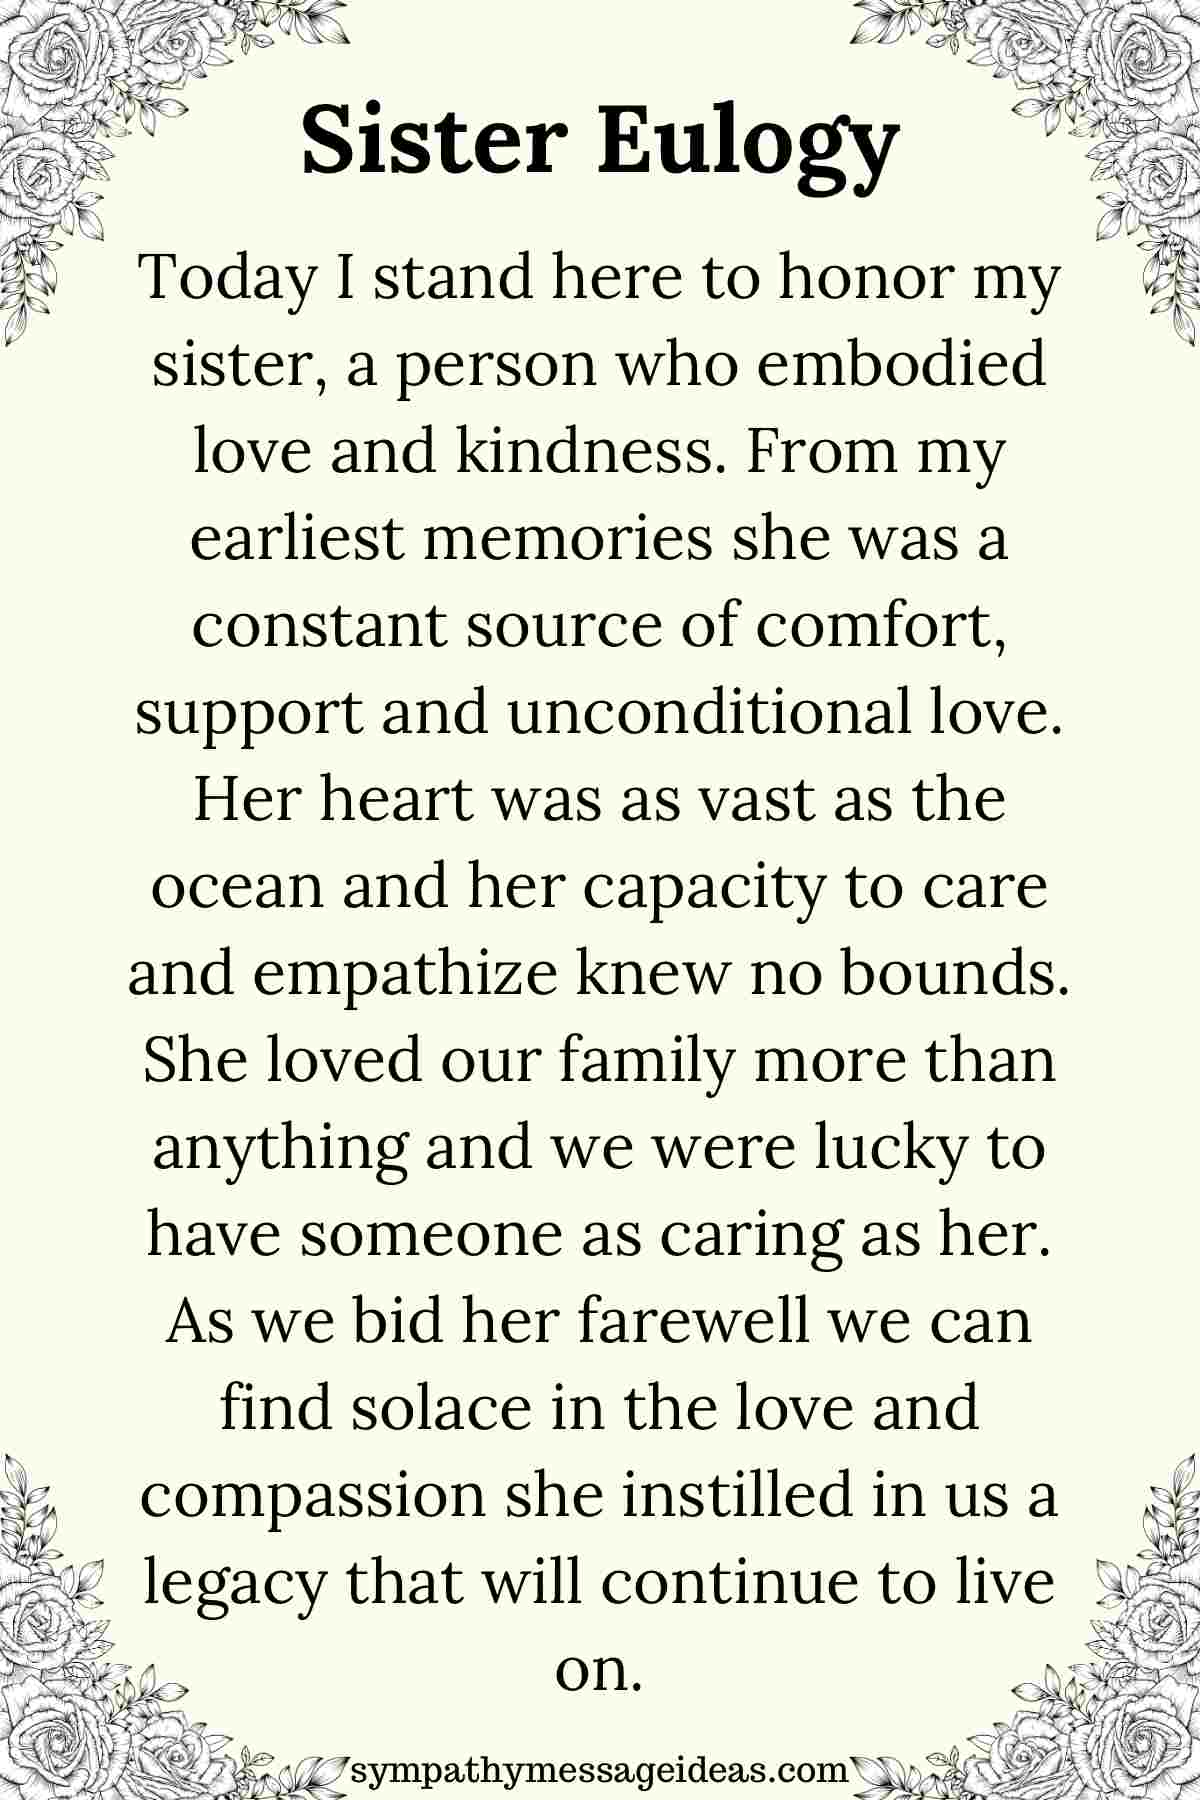 sister eulogy example